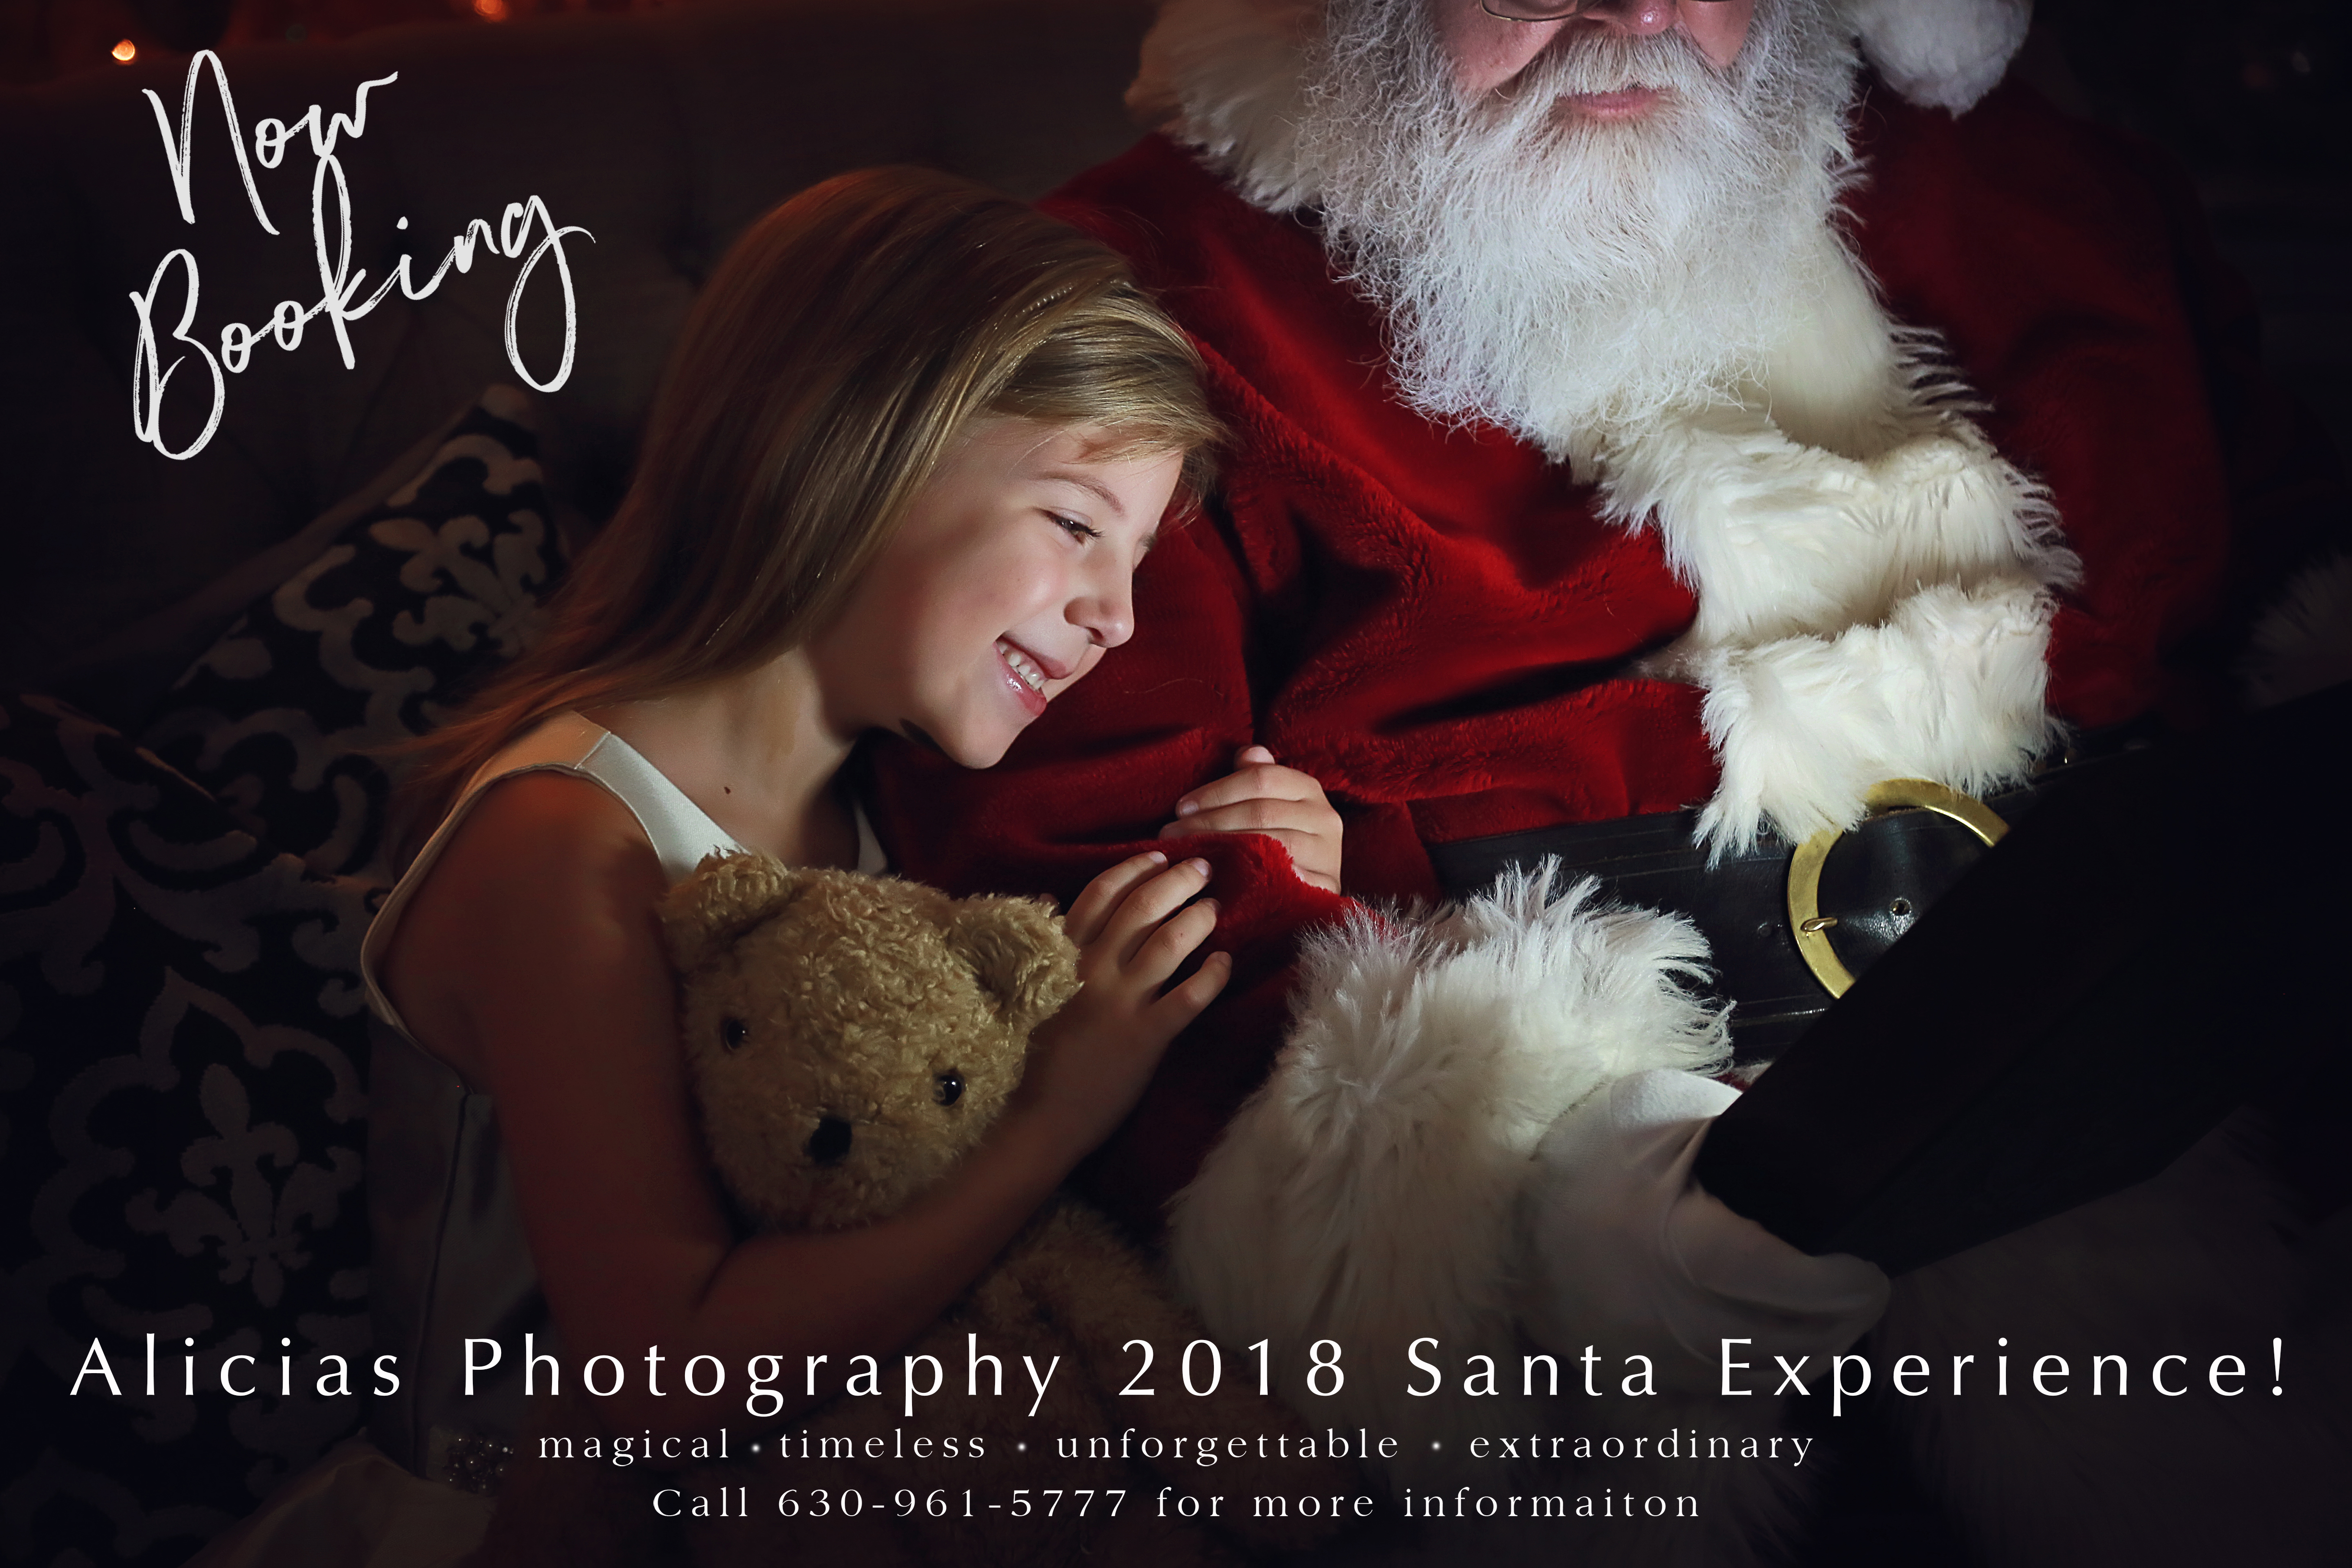 Alicia's Photography Santa Clause Photography Session Family Photography Naperville, Chicago, Hinsdale